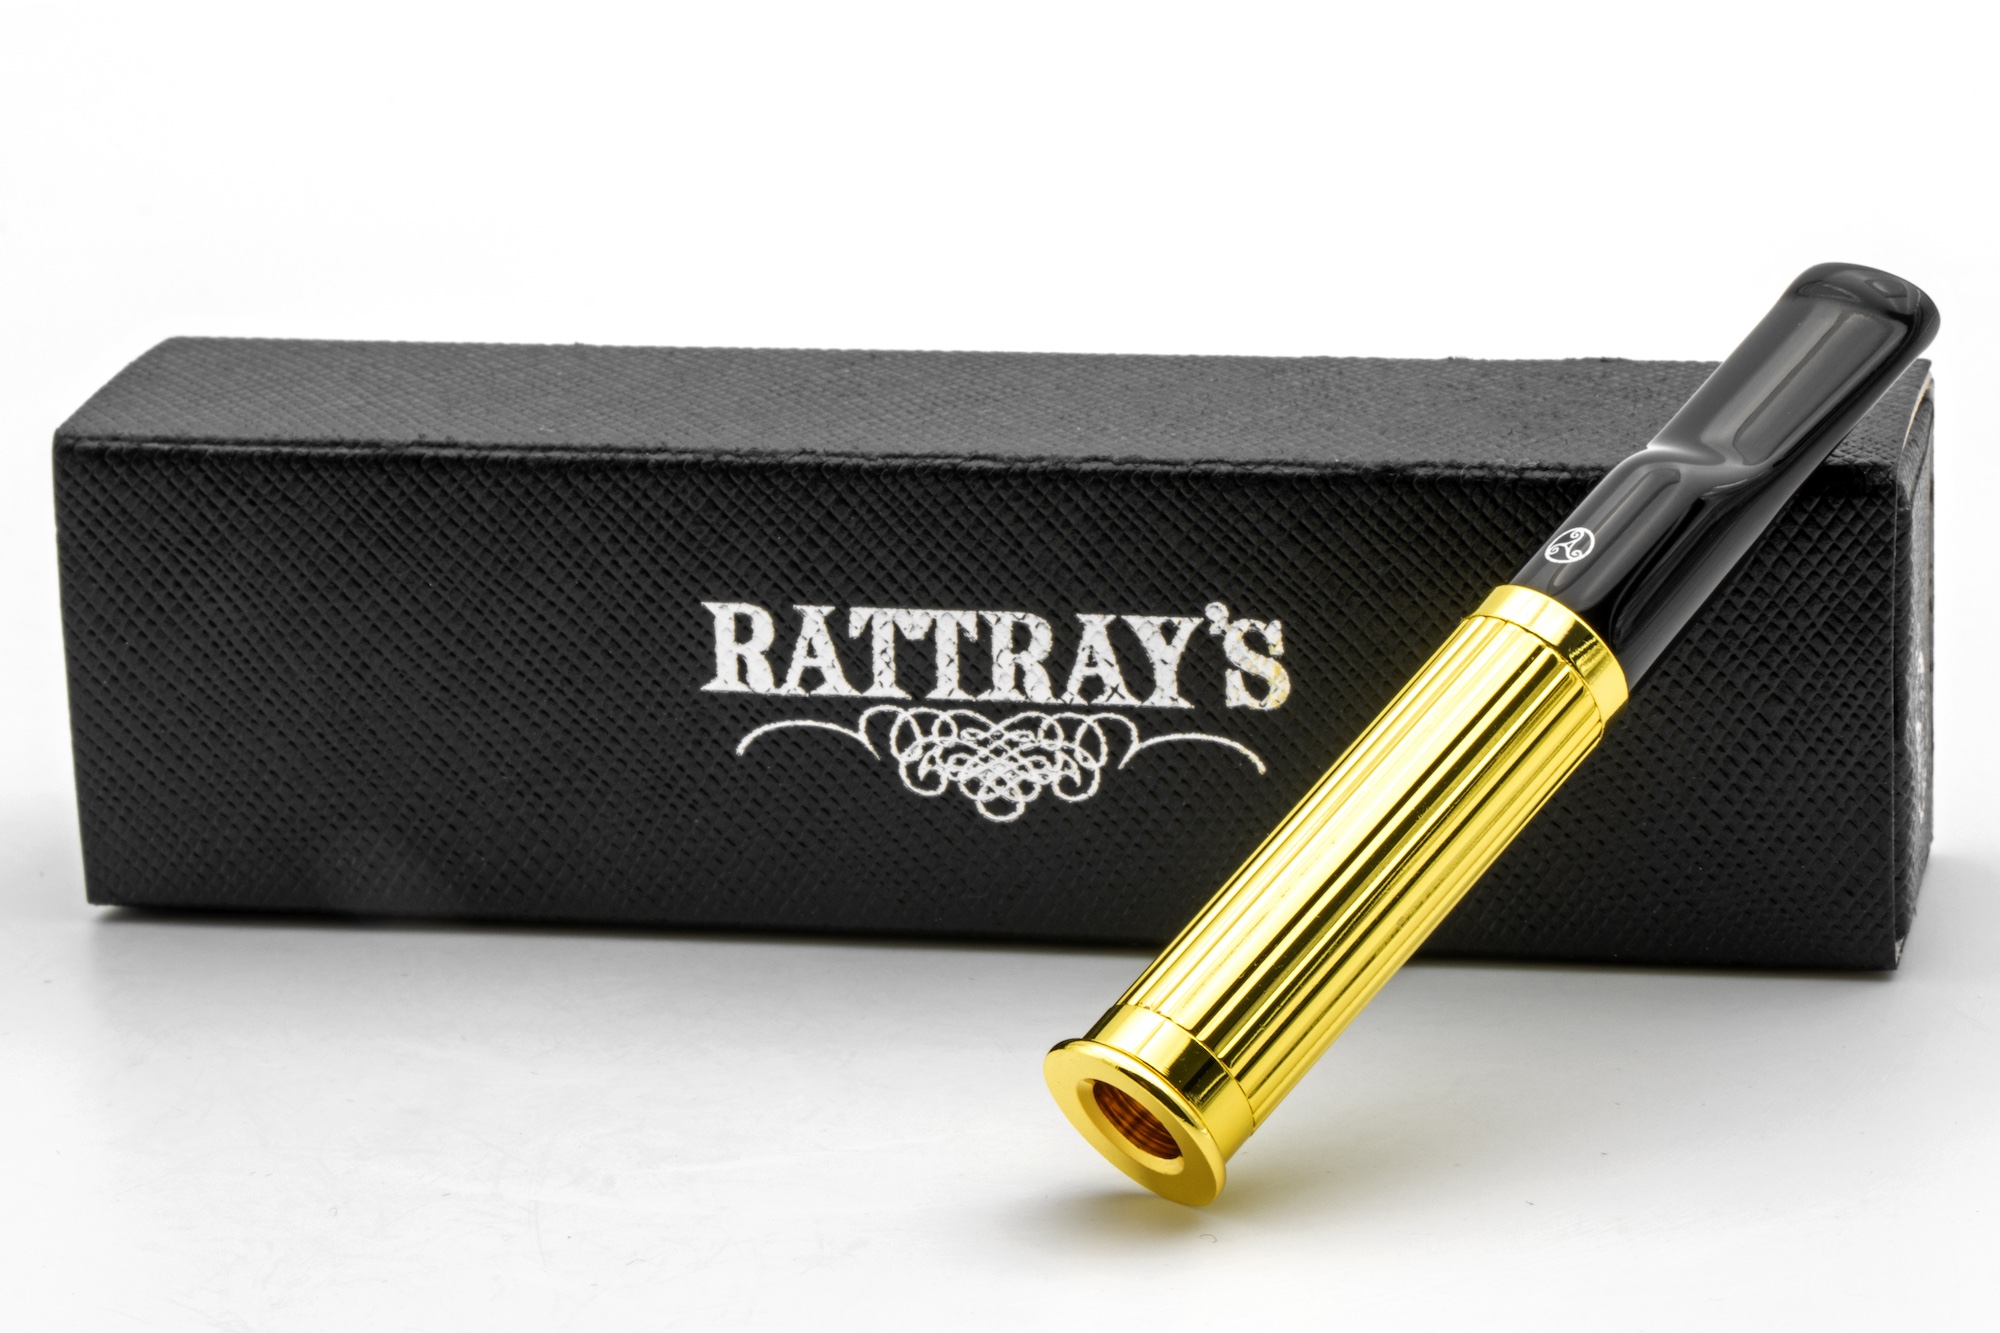 Rattray's Tuby Gold Stripes